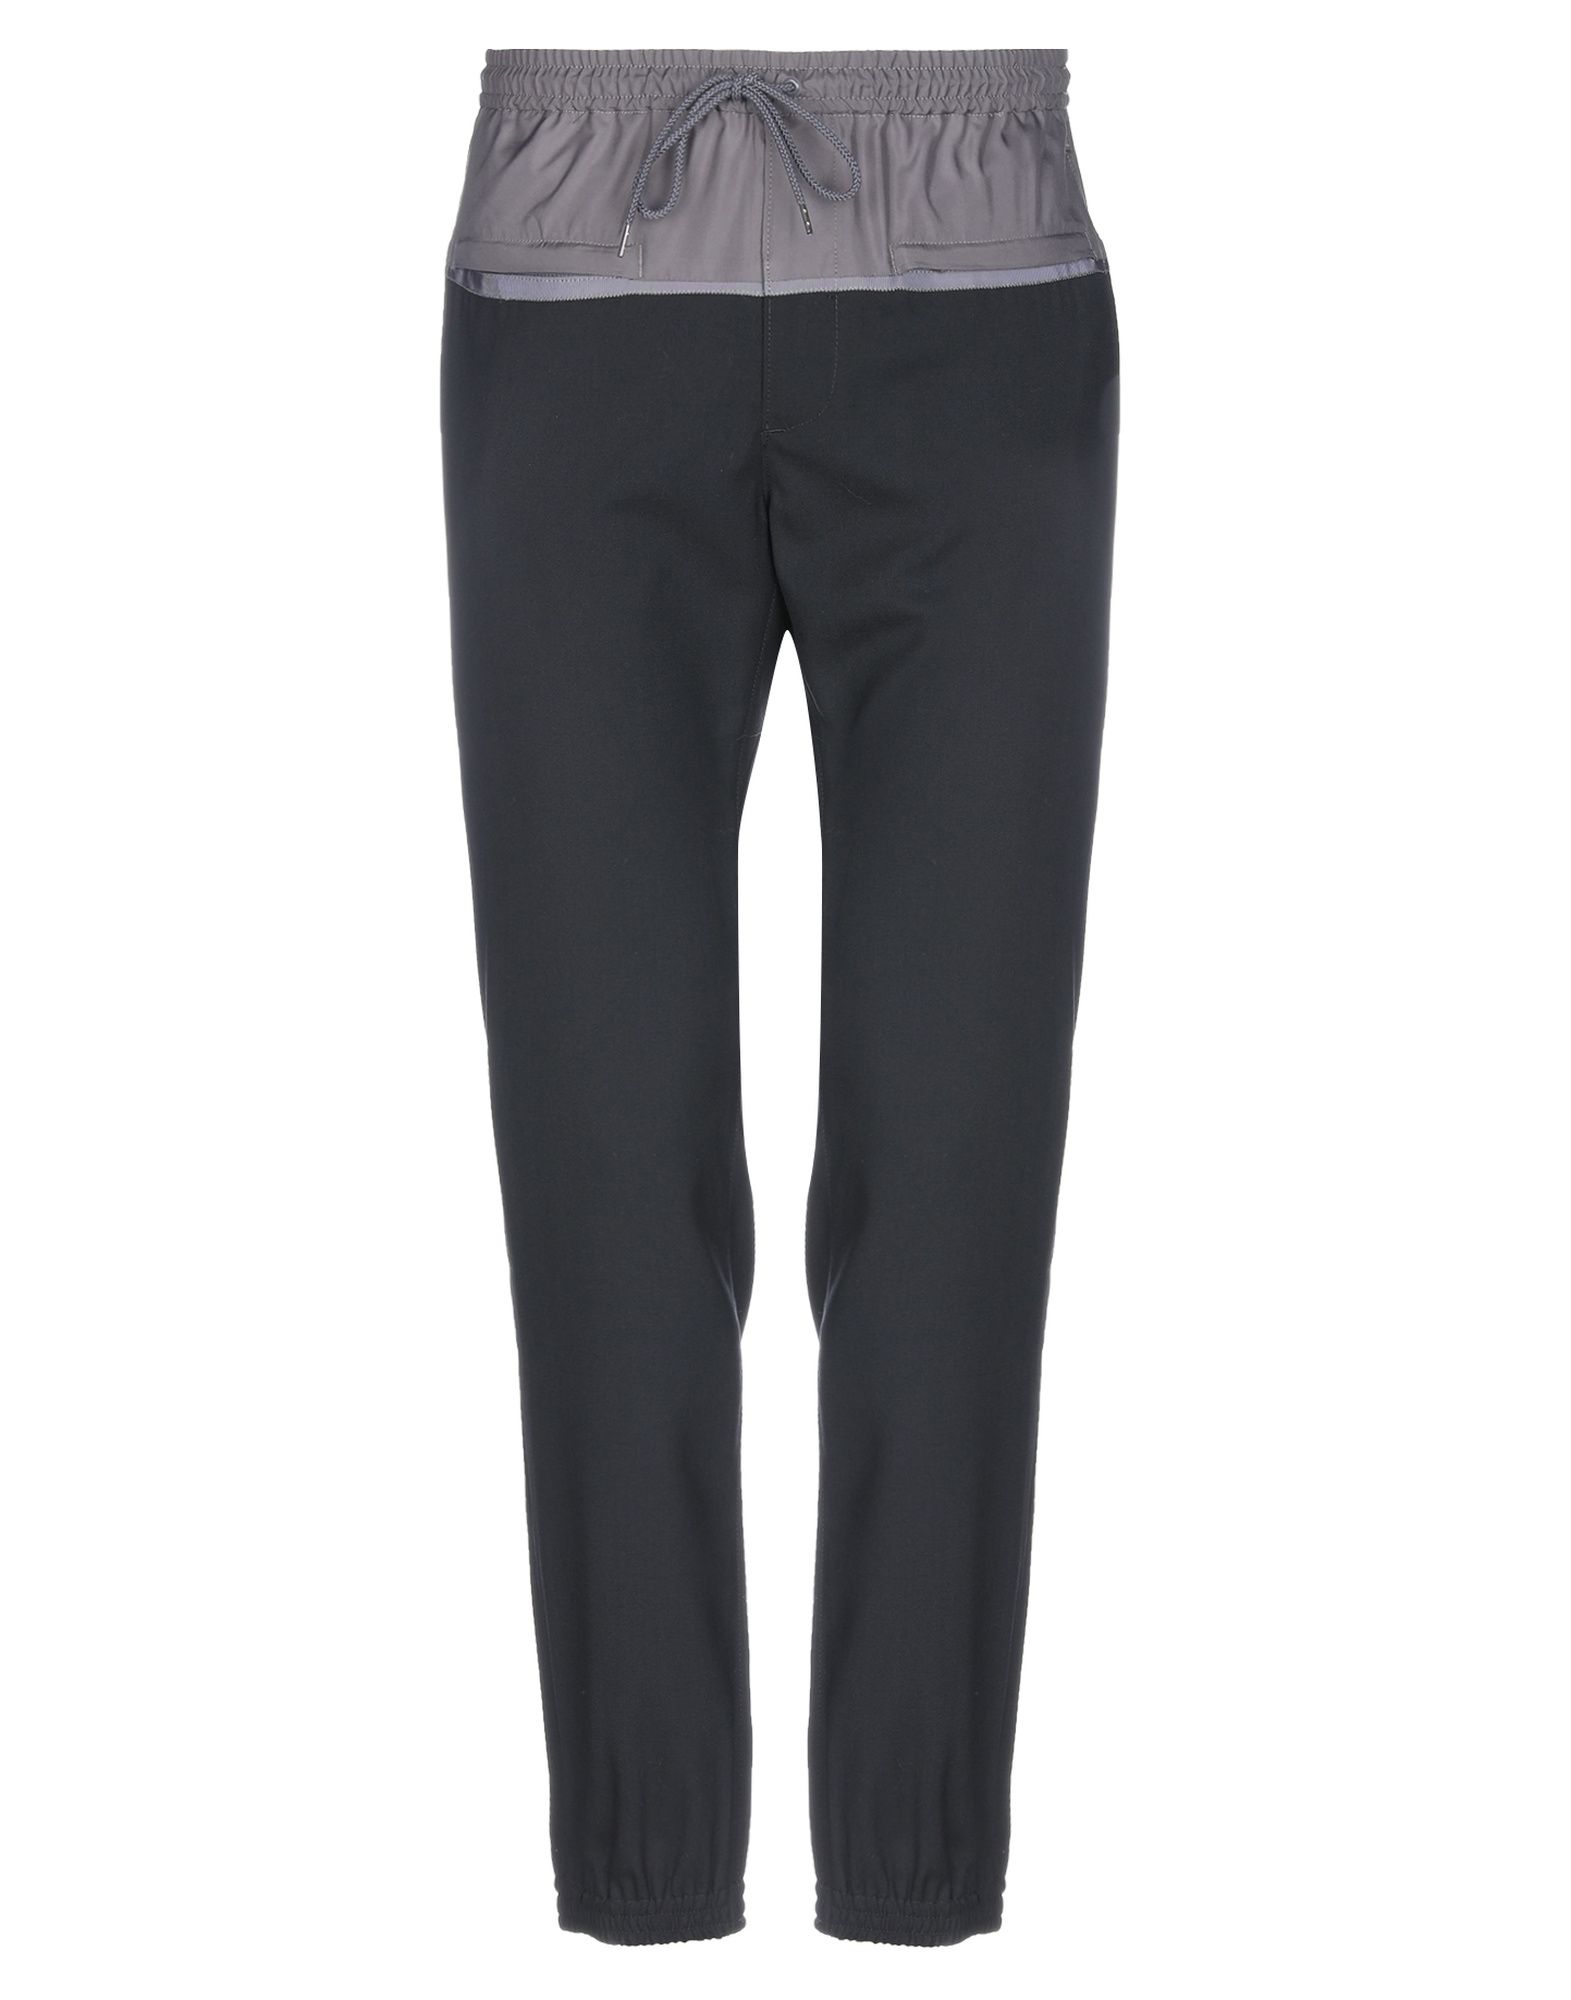 UNDERCOVER Casual pants,13330439HO 3